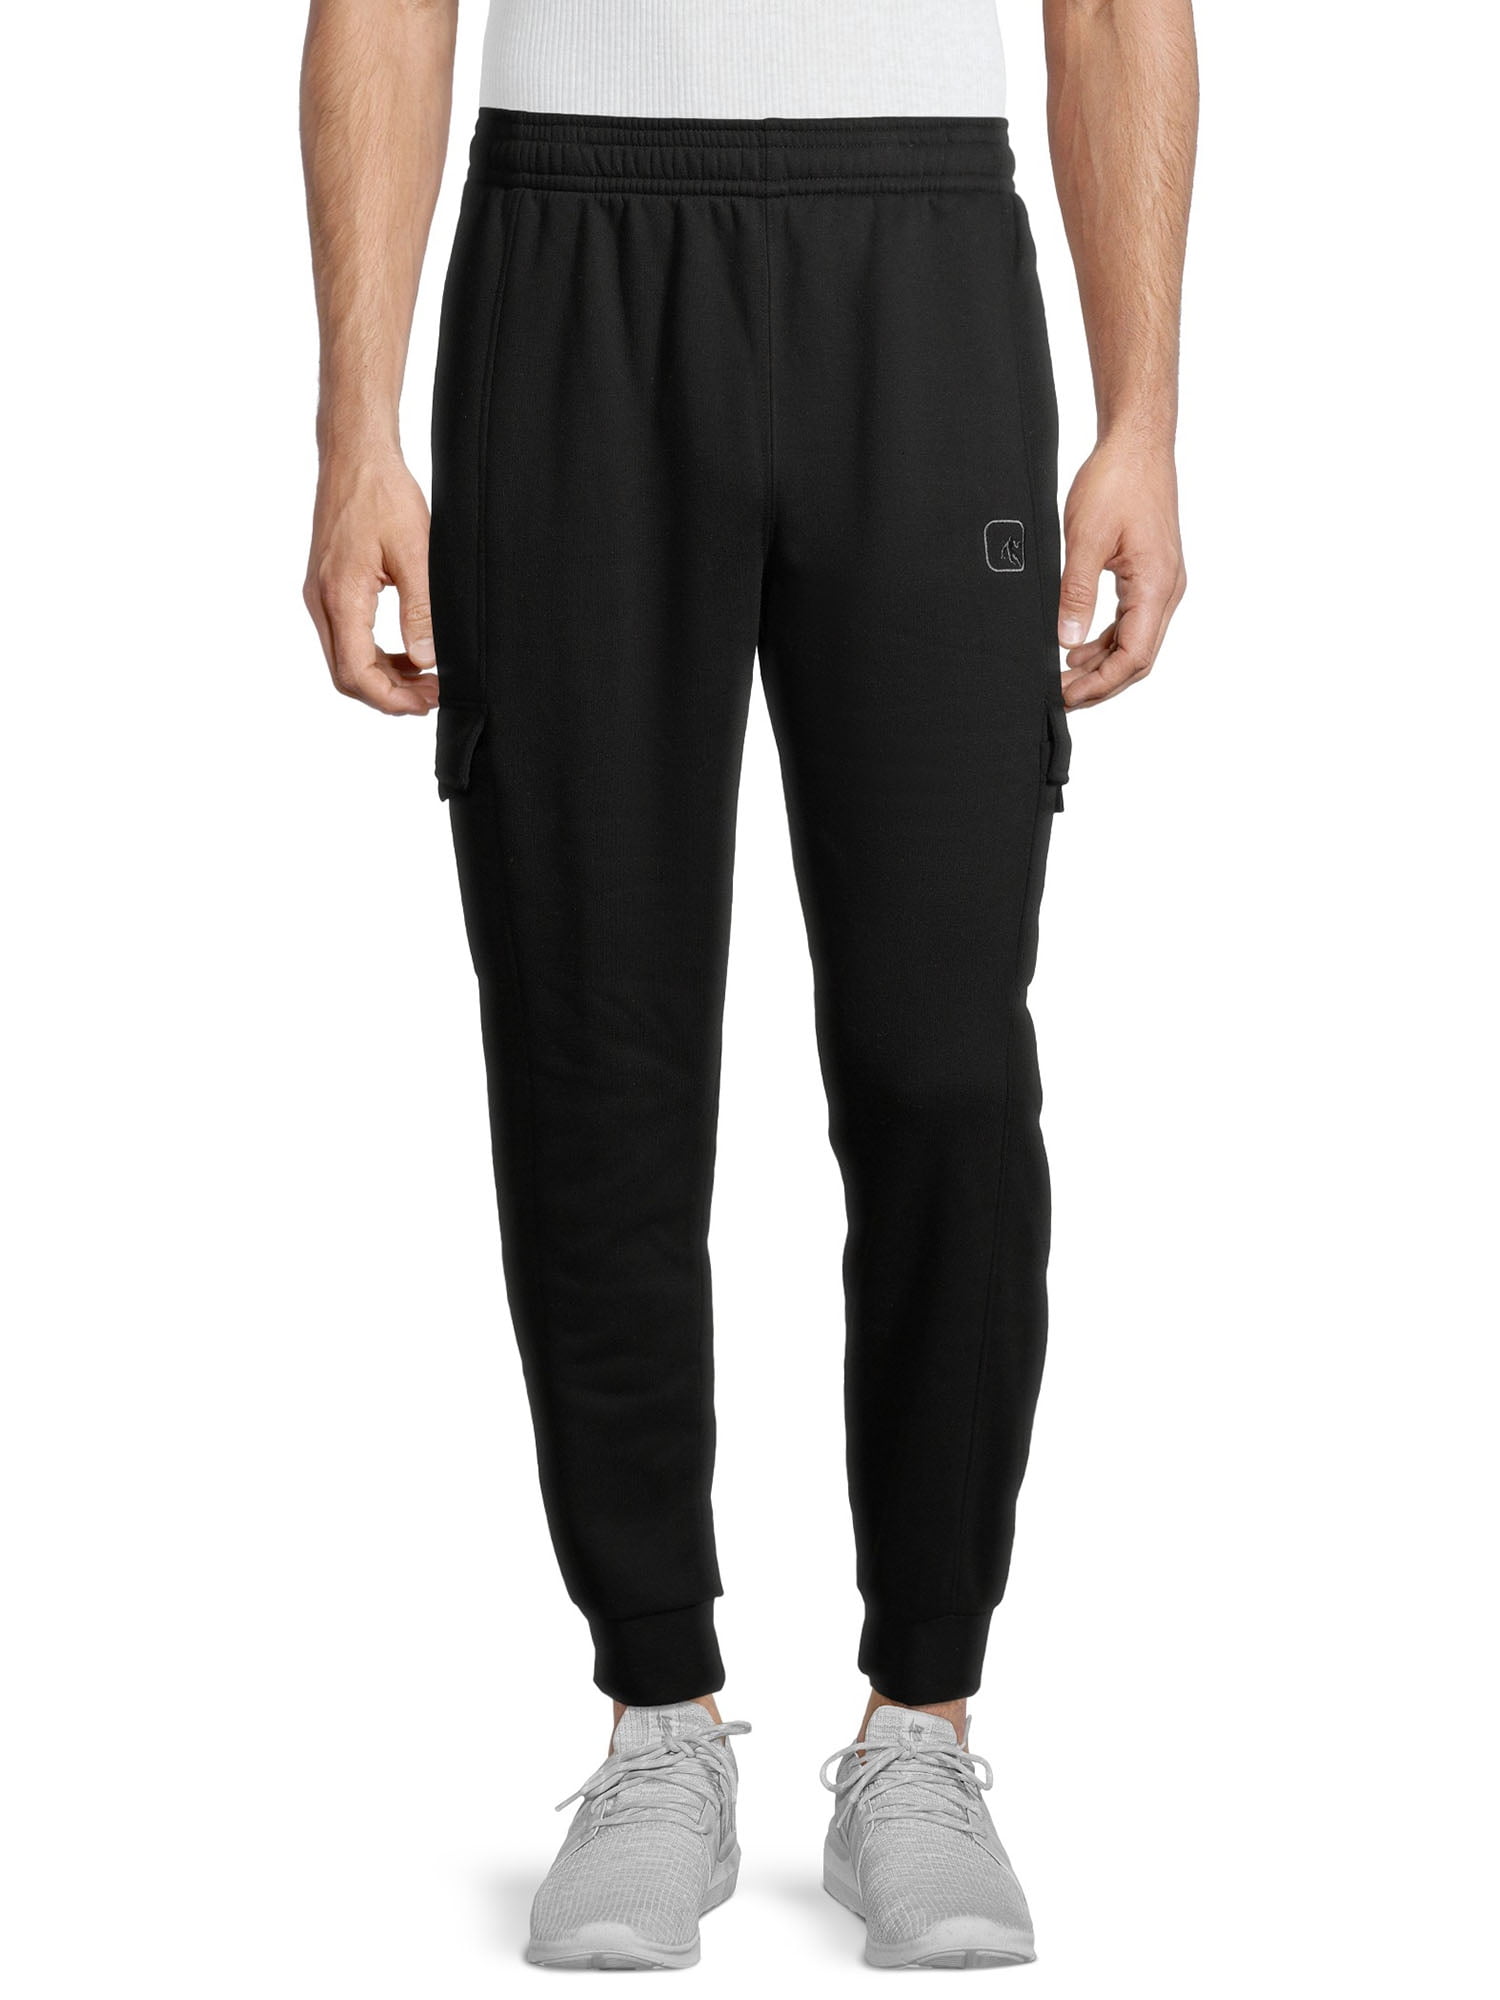 AND1 Men's and Big Men's Active Cargo Fleece Jogger Sweatpants, up to ...